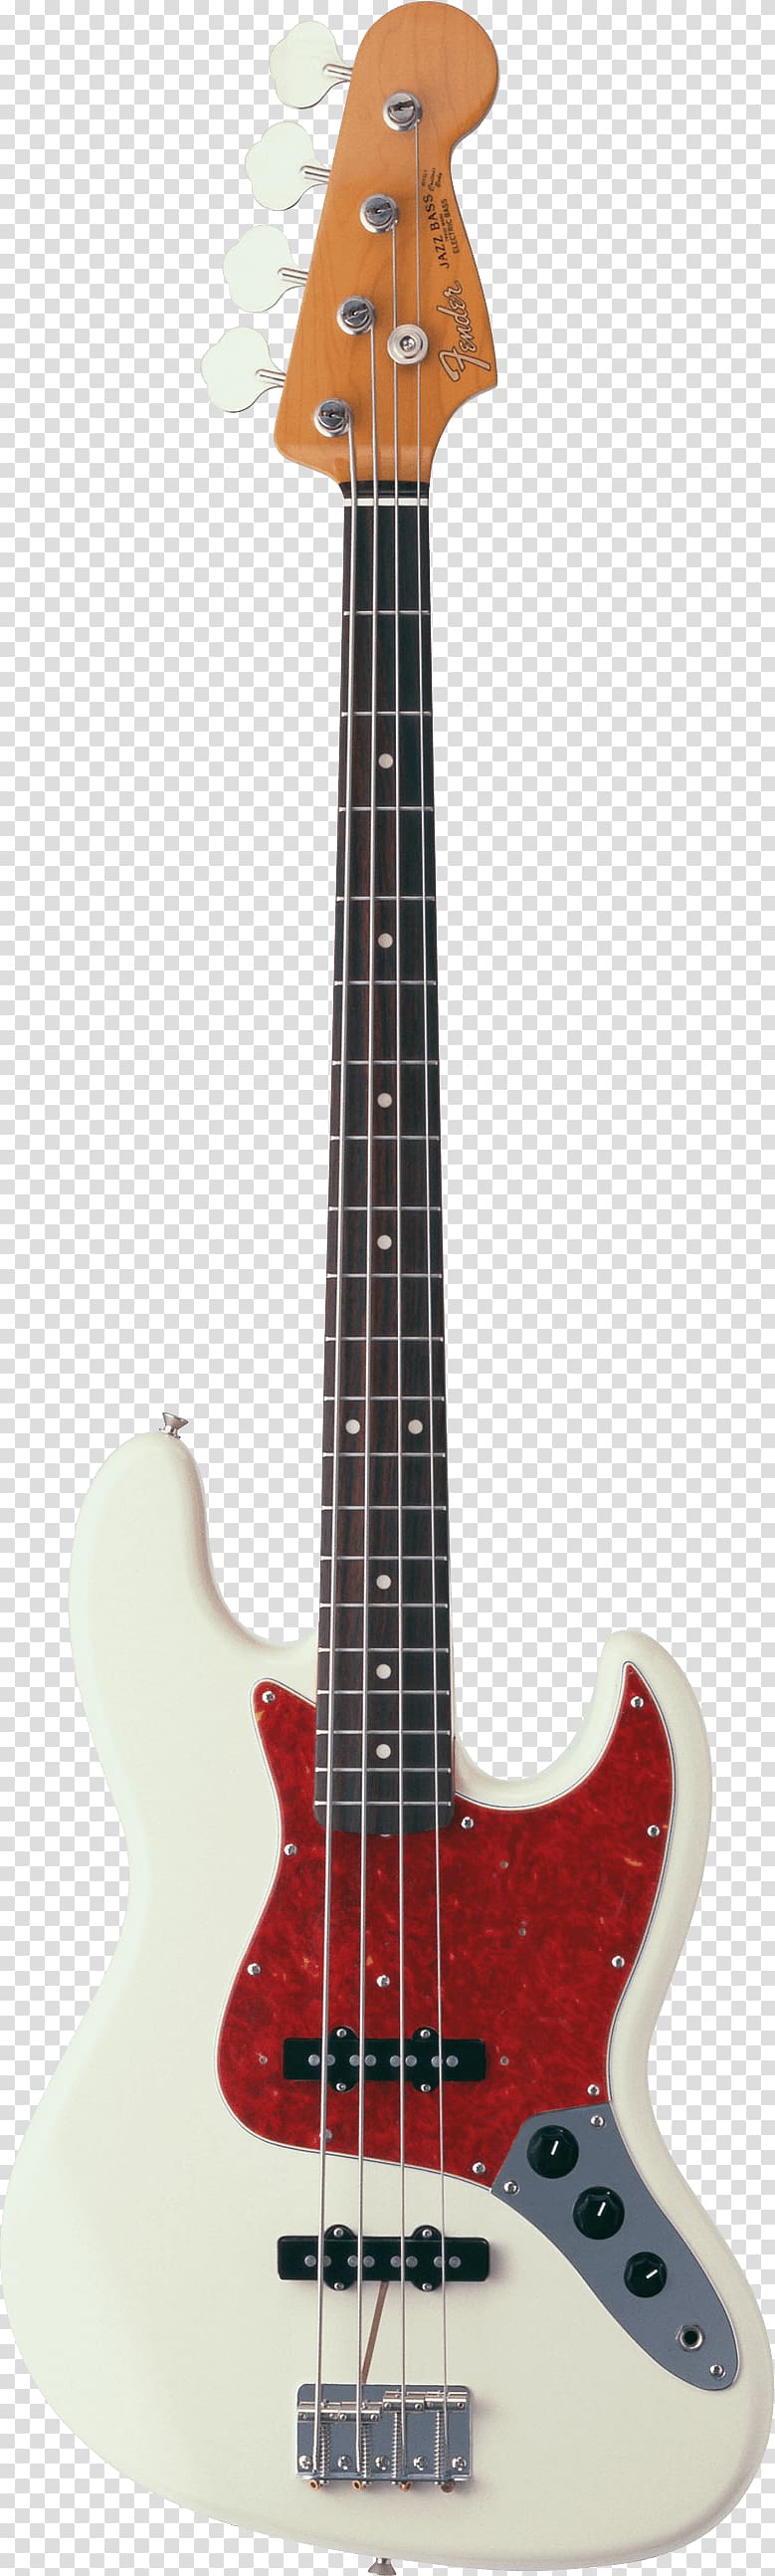 white and red 4-string bass guitar, Fender Precision Bass Fender Standard Jazz Bass Bass guitar Fender Jazz Bass, Electric Guitar transparent background PNG clipart